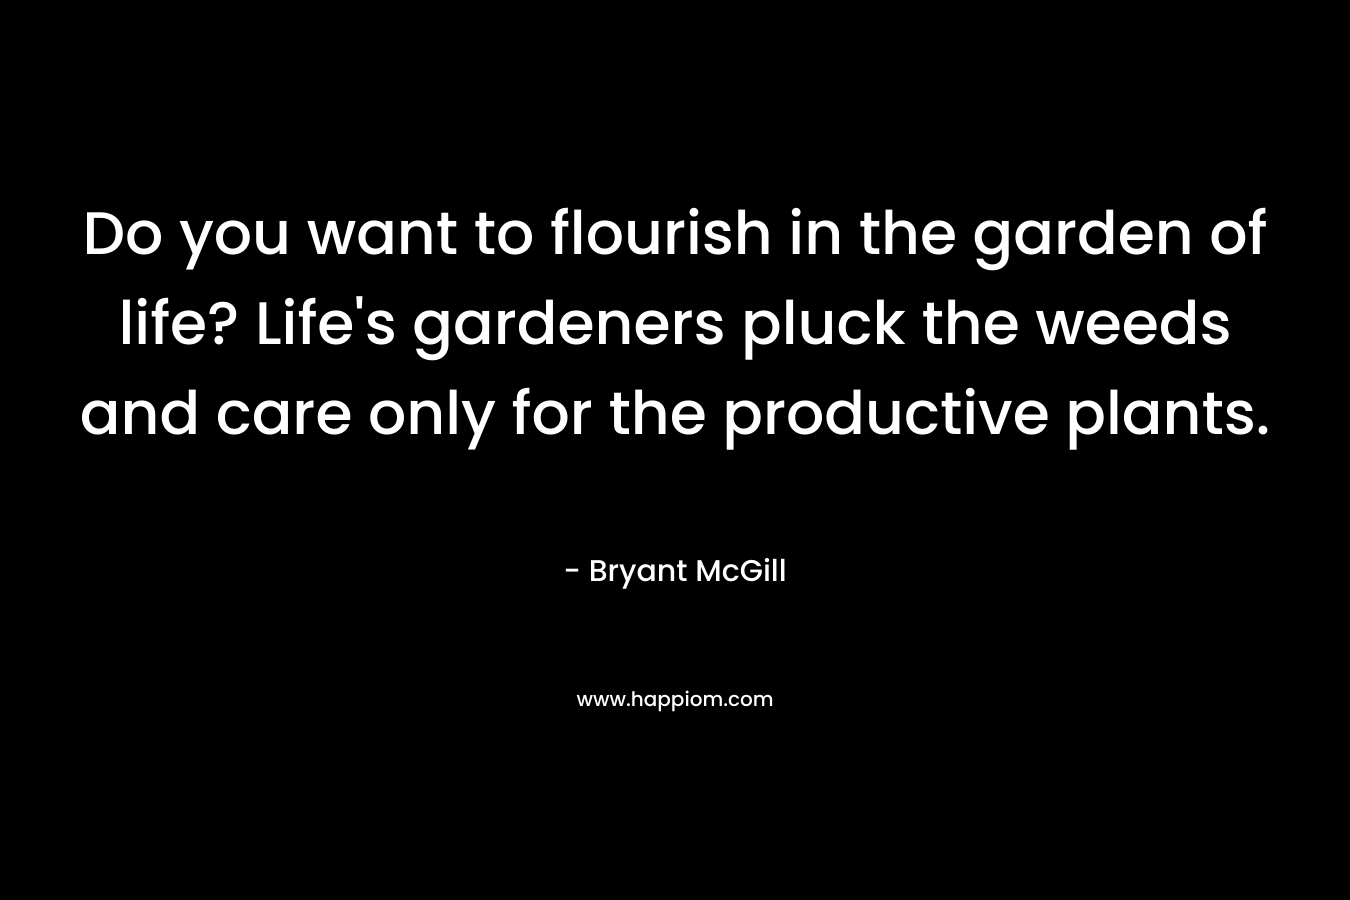 Do you want to flourish in the garden of life? Life's gardeners pluck the weeds and care only for the productive plants.